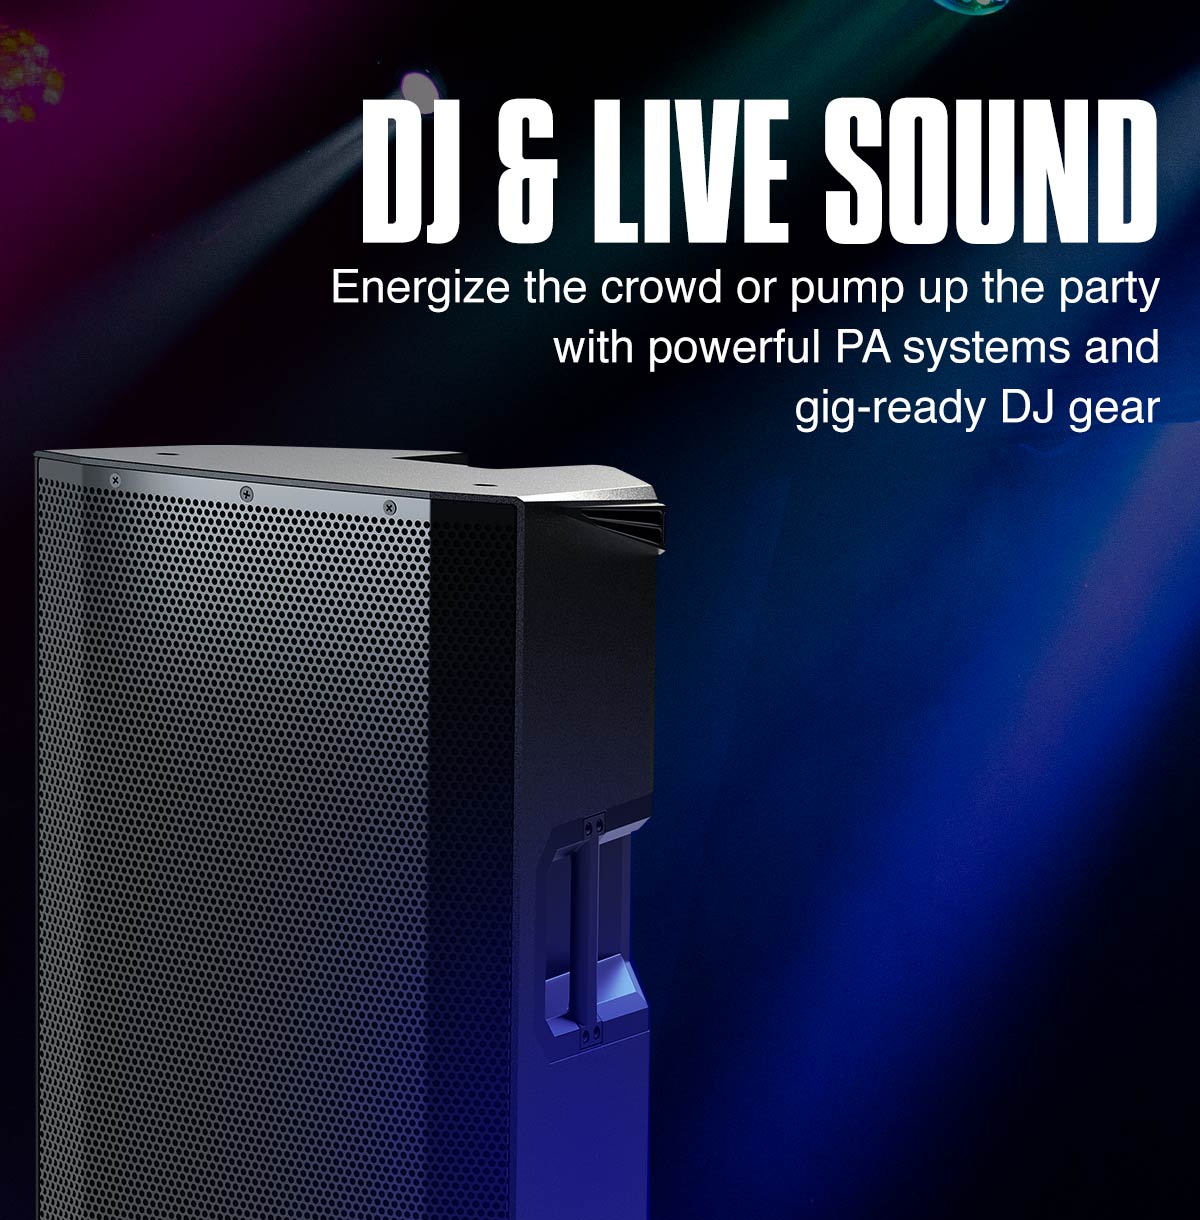 DJ and live sound. Energize the crowd or pump up the party with powerful PA systems and gig ready DJ gear.